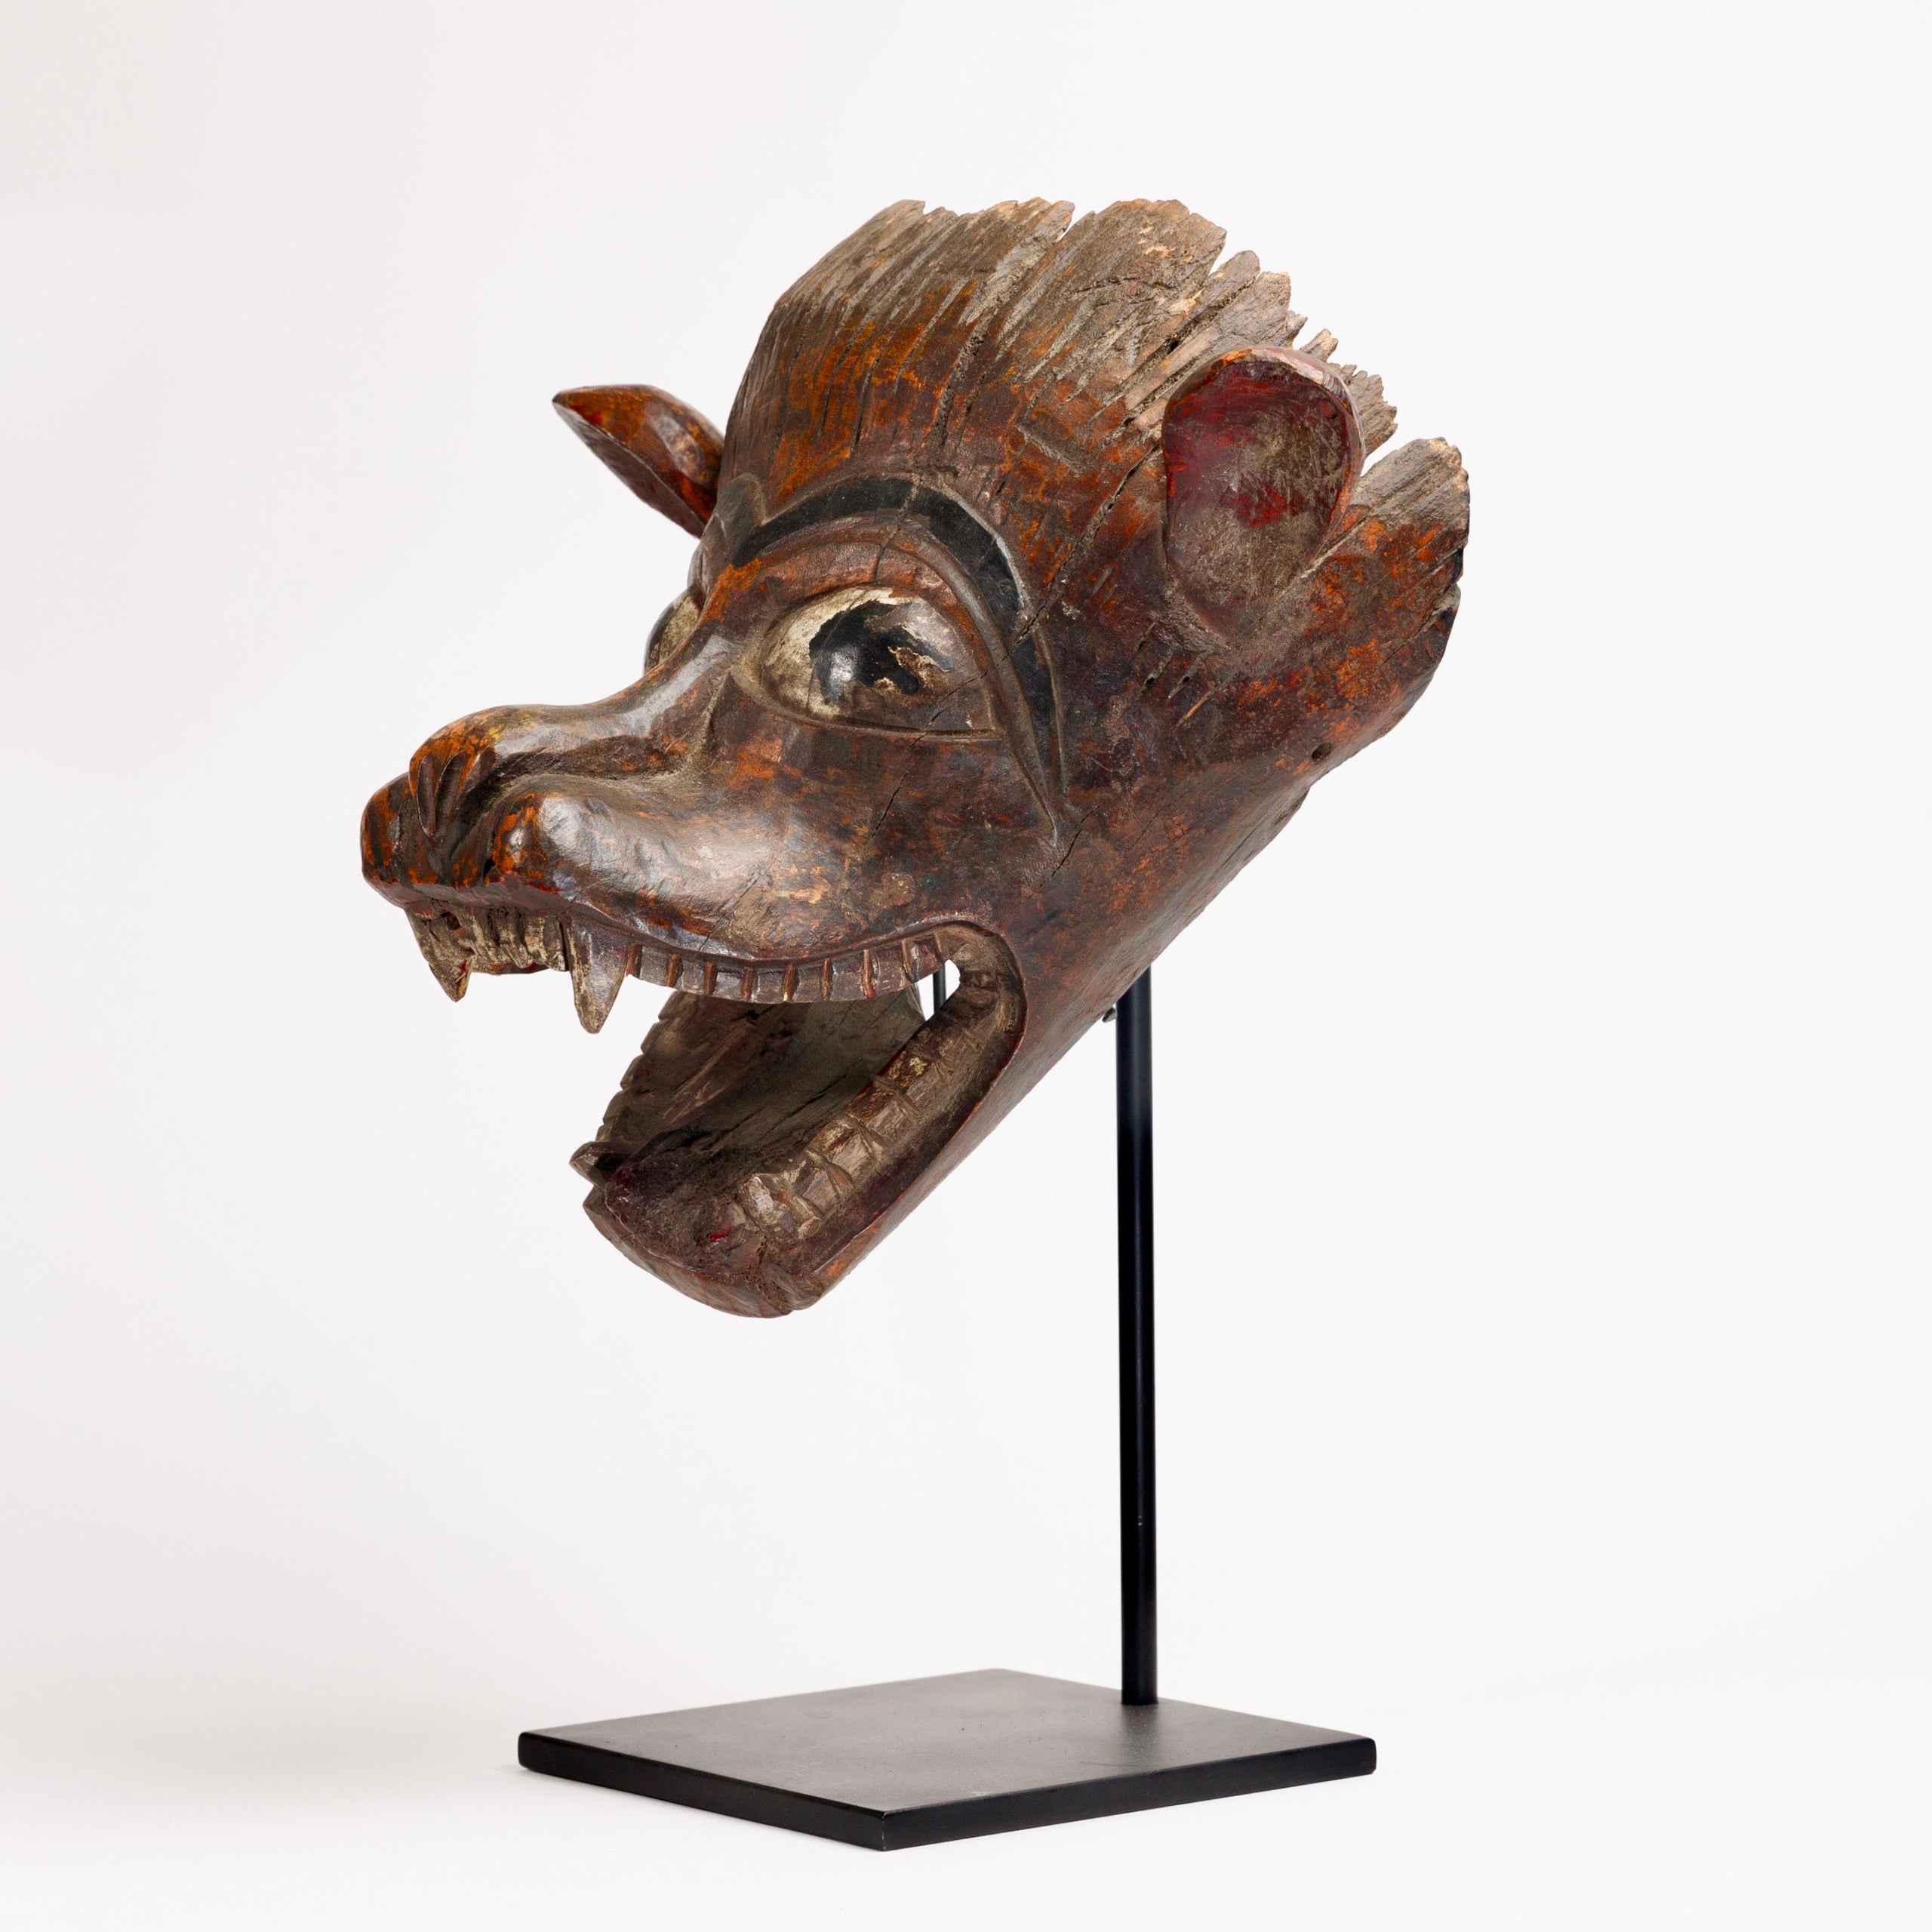 binnenkomst Middelen Nageslacht From the Terai rerion of Southern Nepal a remarkable wolf mask